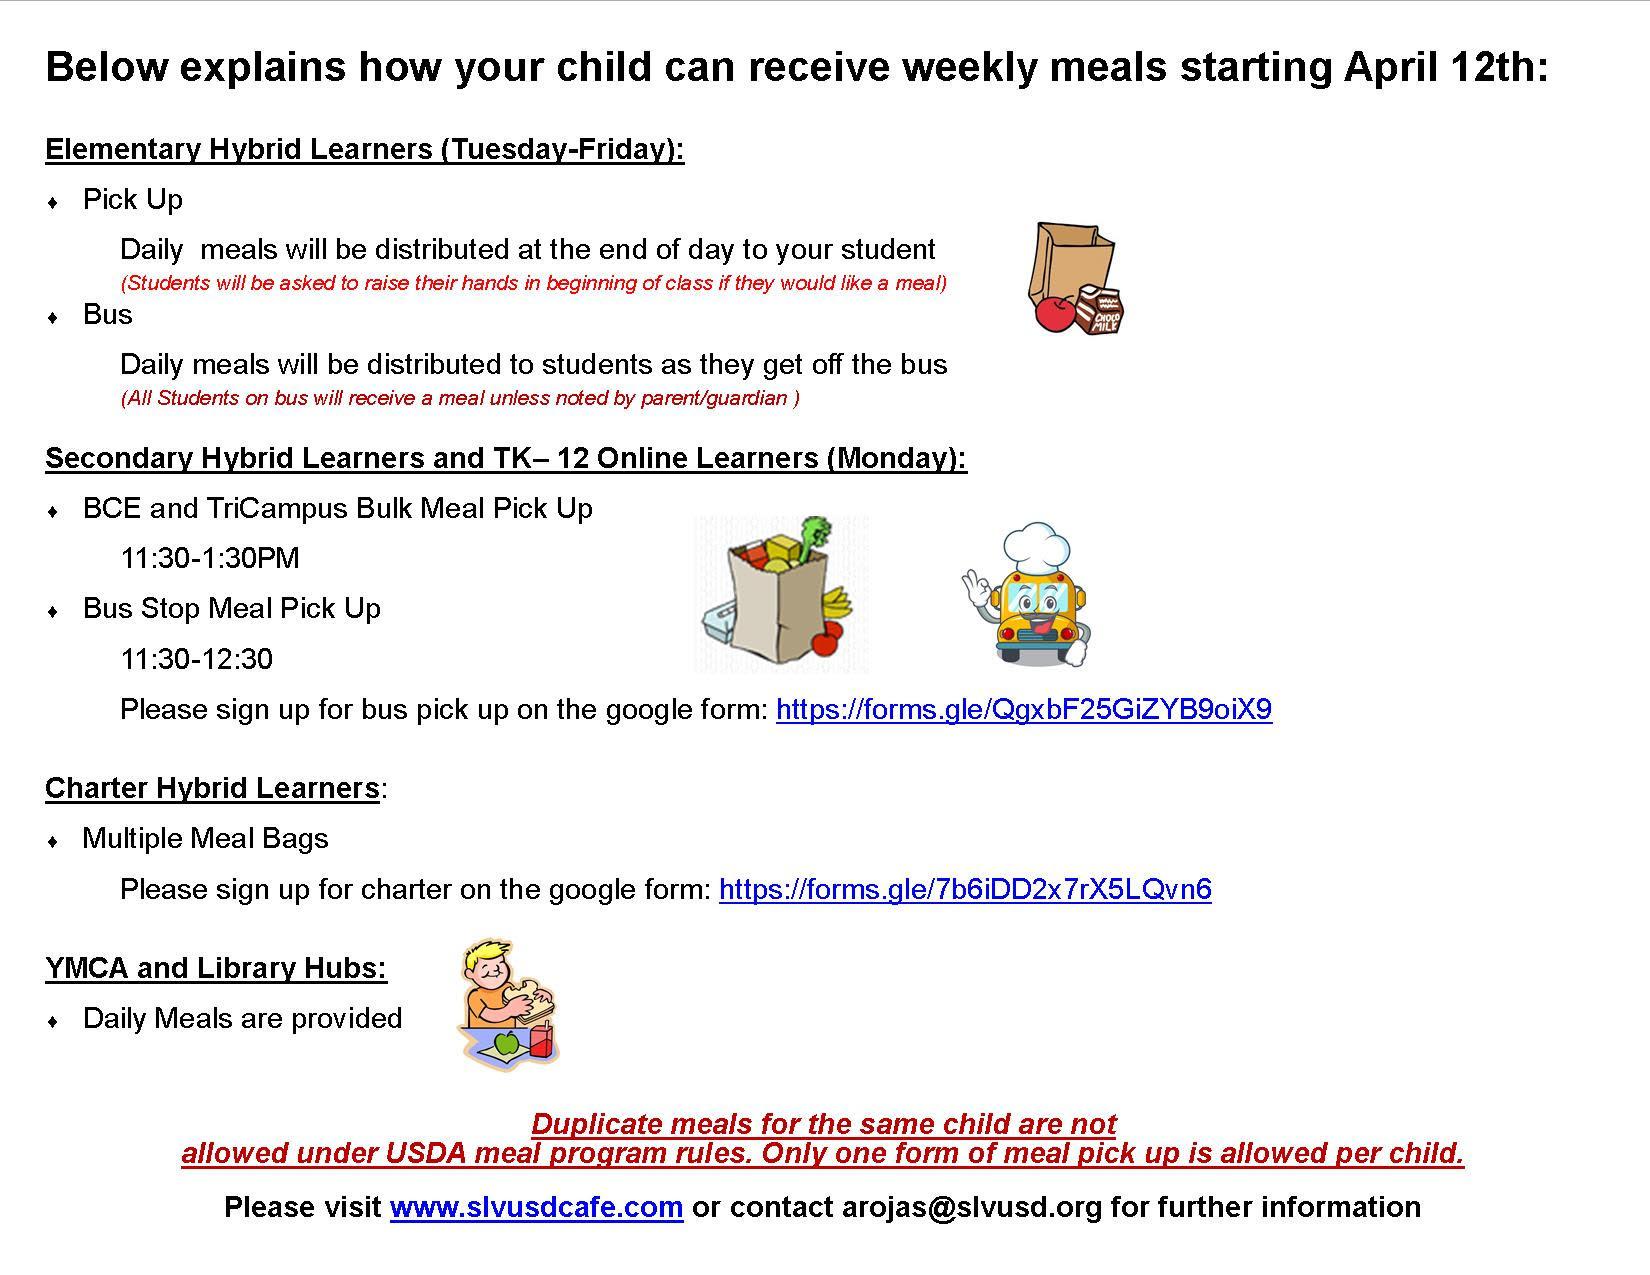 weekly meals info; email arojas@slvusd.org for detais